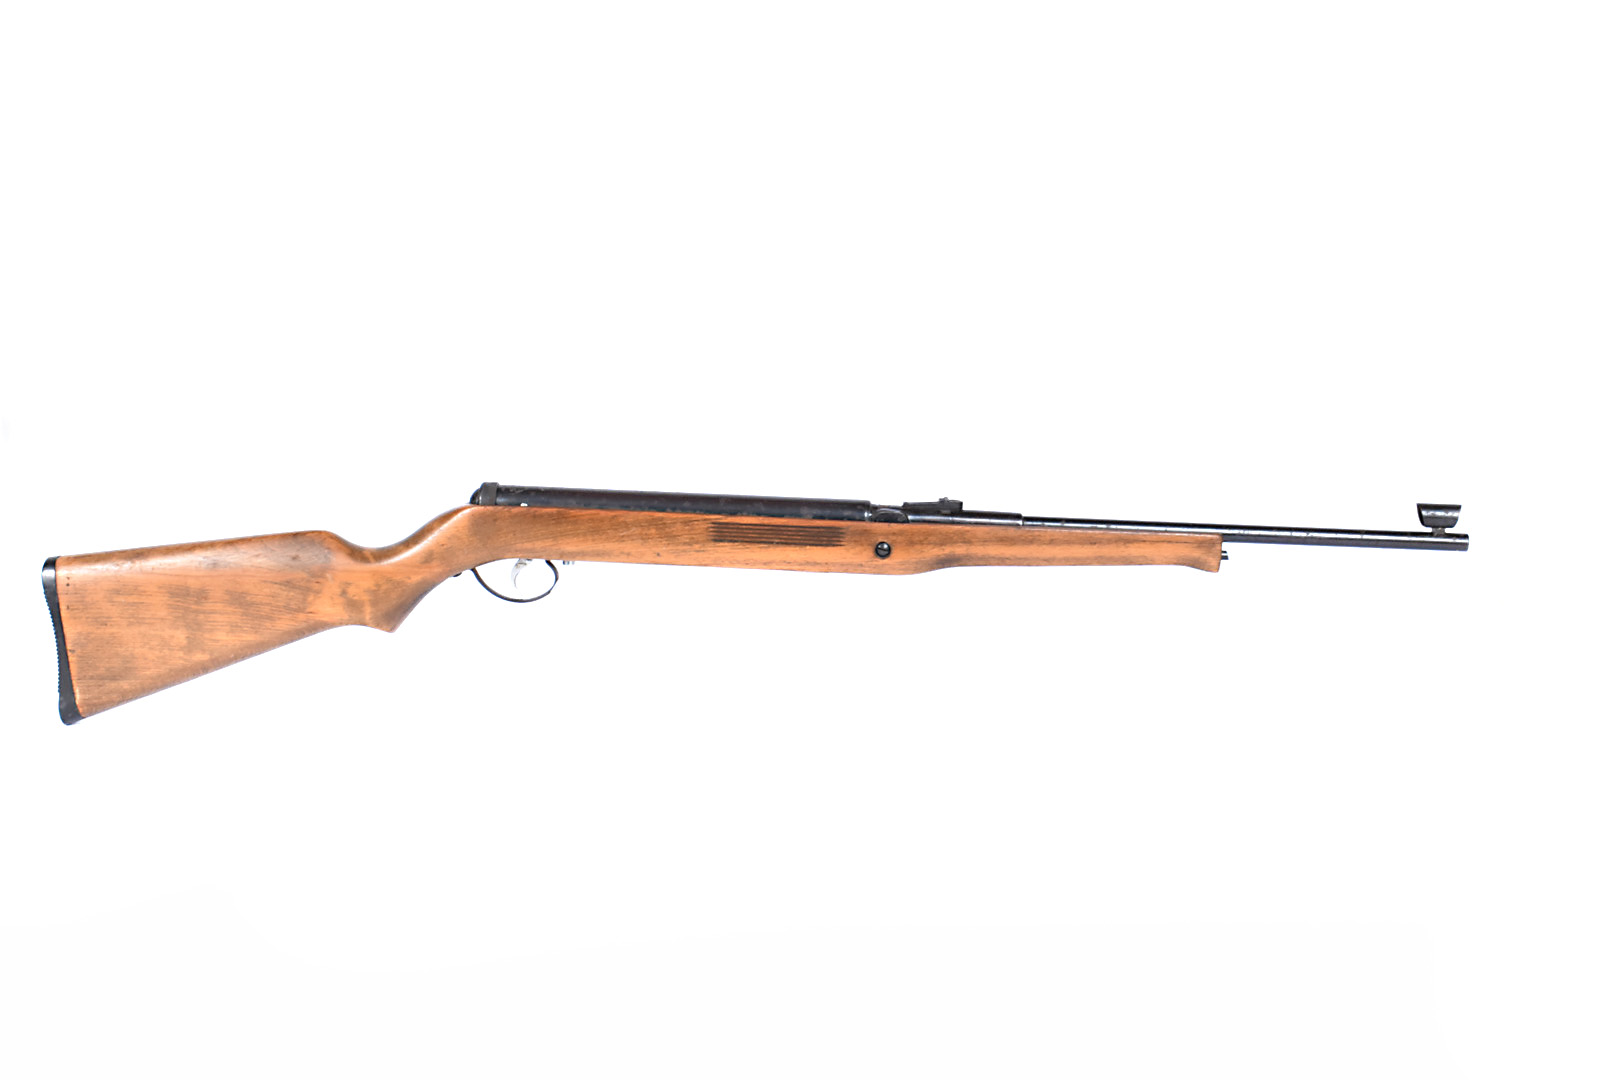 A vintage Diana Mod 55 .177 calibre air rifle, serial 551090, underlever action, with sight